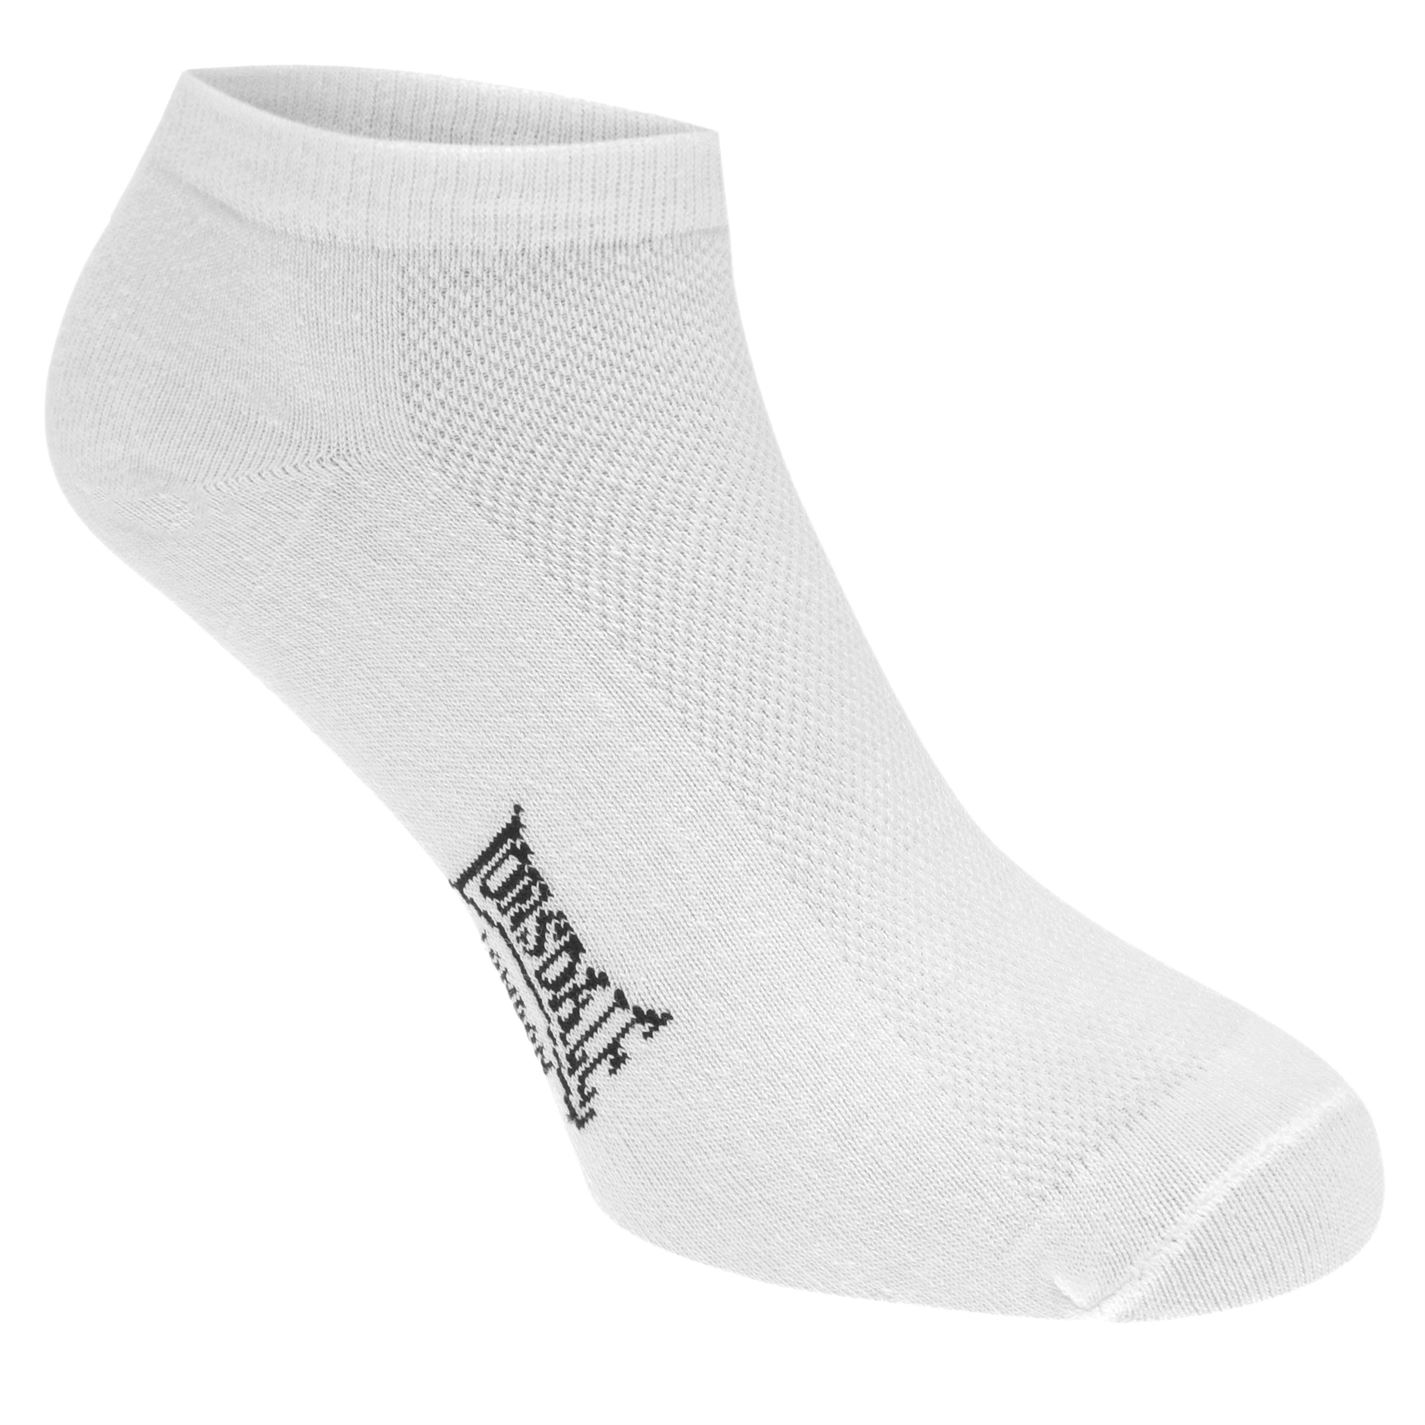 Lonsdale Mens 5 Pack Trainer Socks Stretch Knitted | eBay